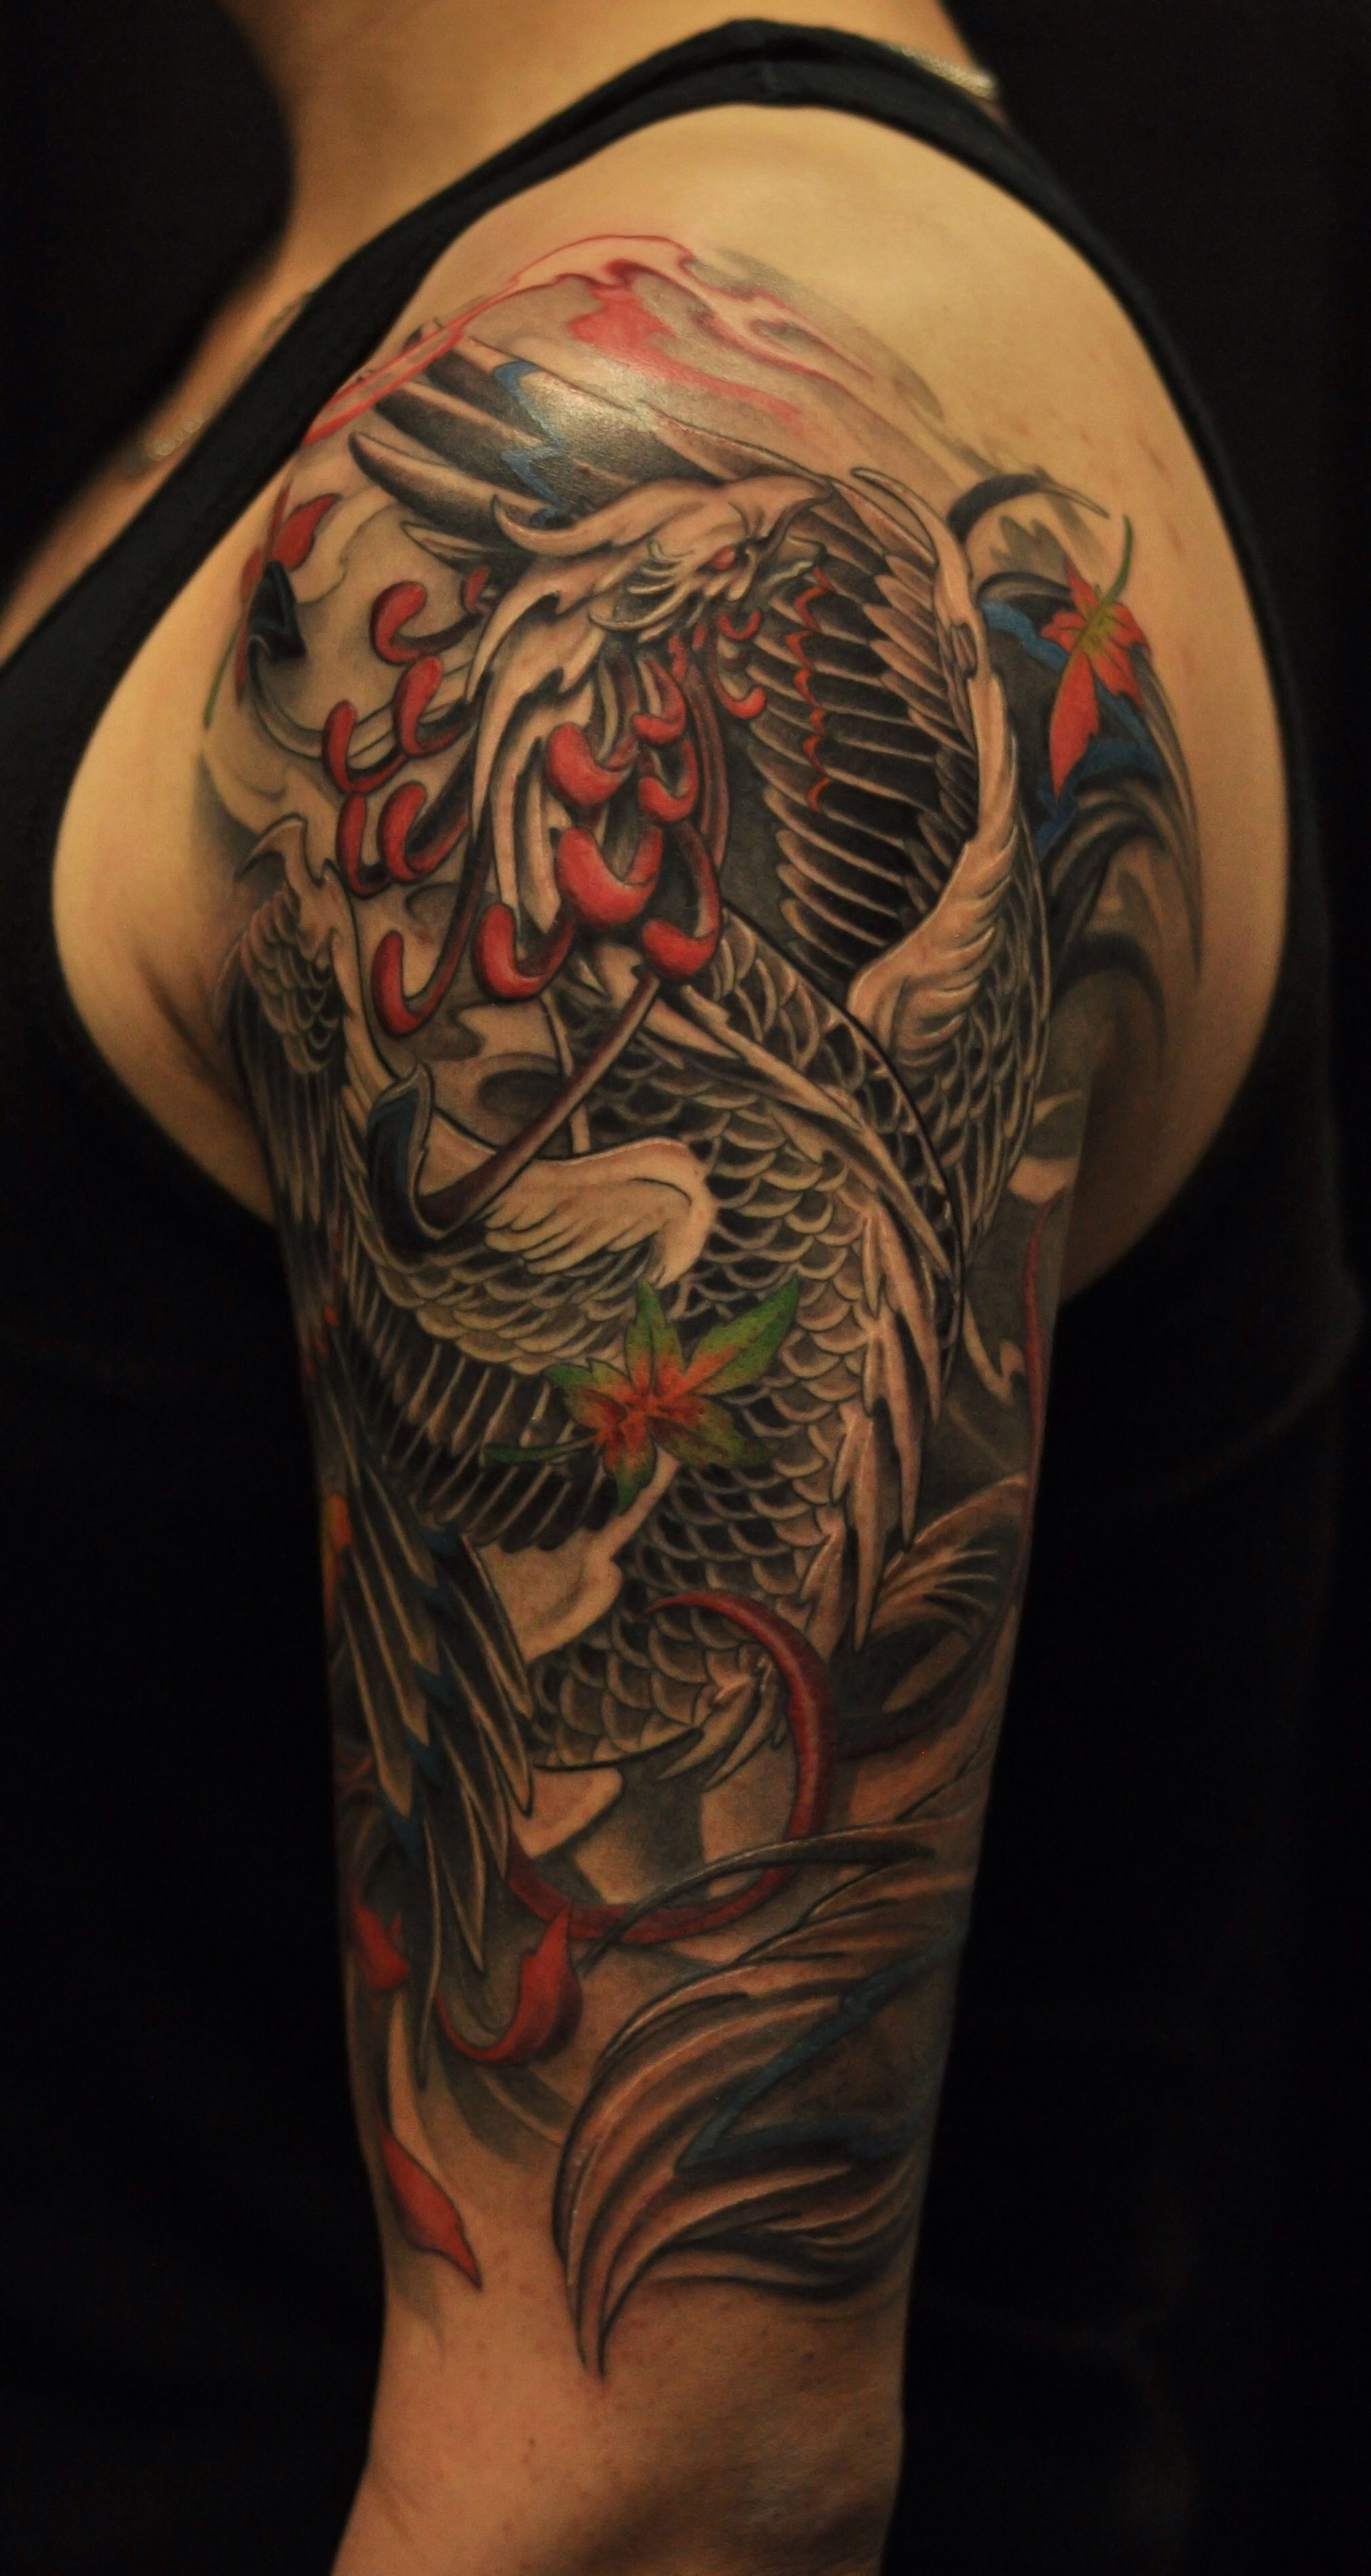 This Is One Of The Coolest Phoenix Tattoos Ive Seen Tattoo regarding measurements 2022 X 3798